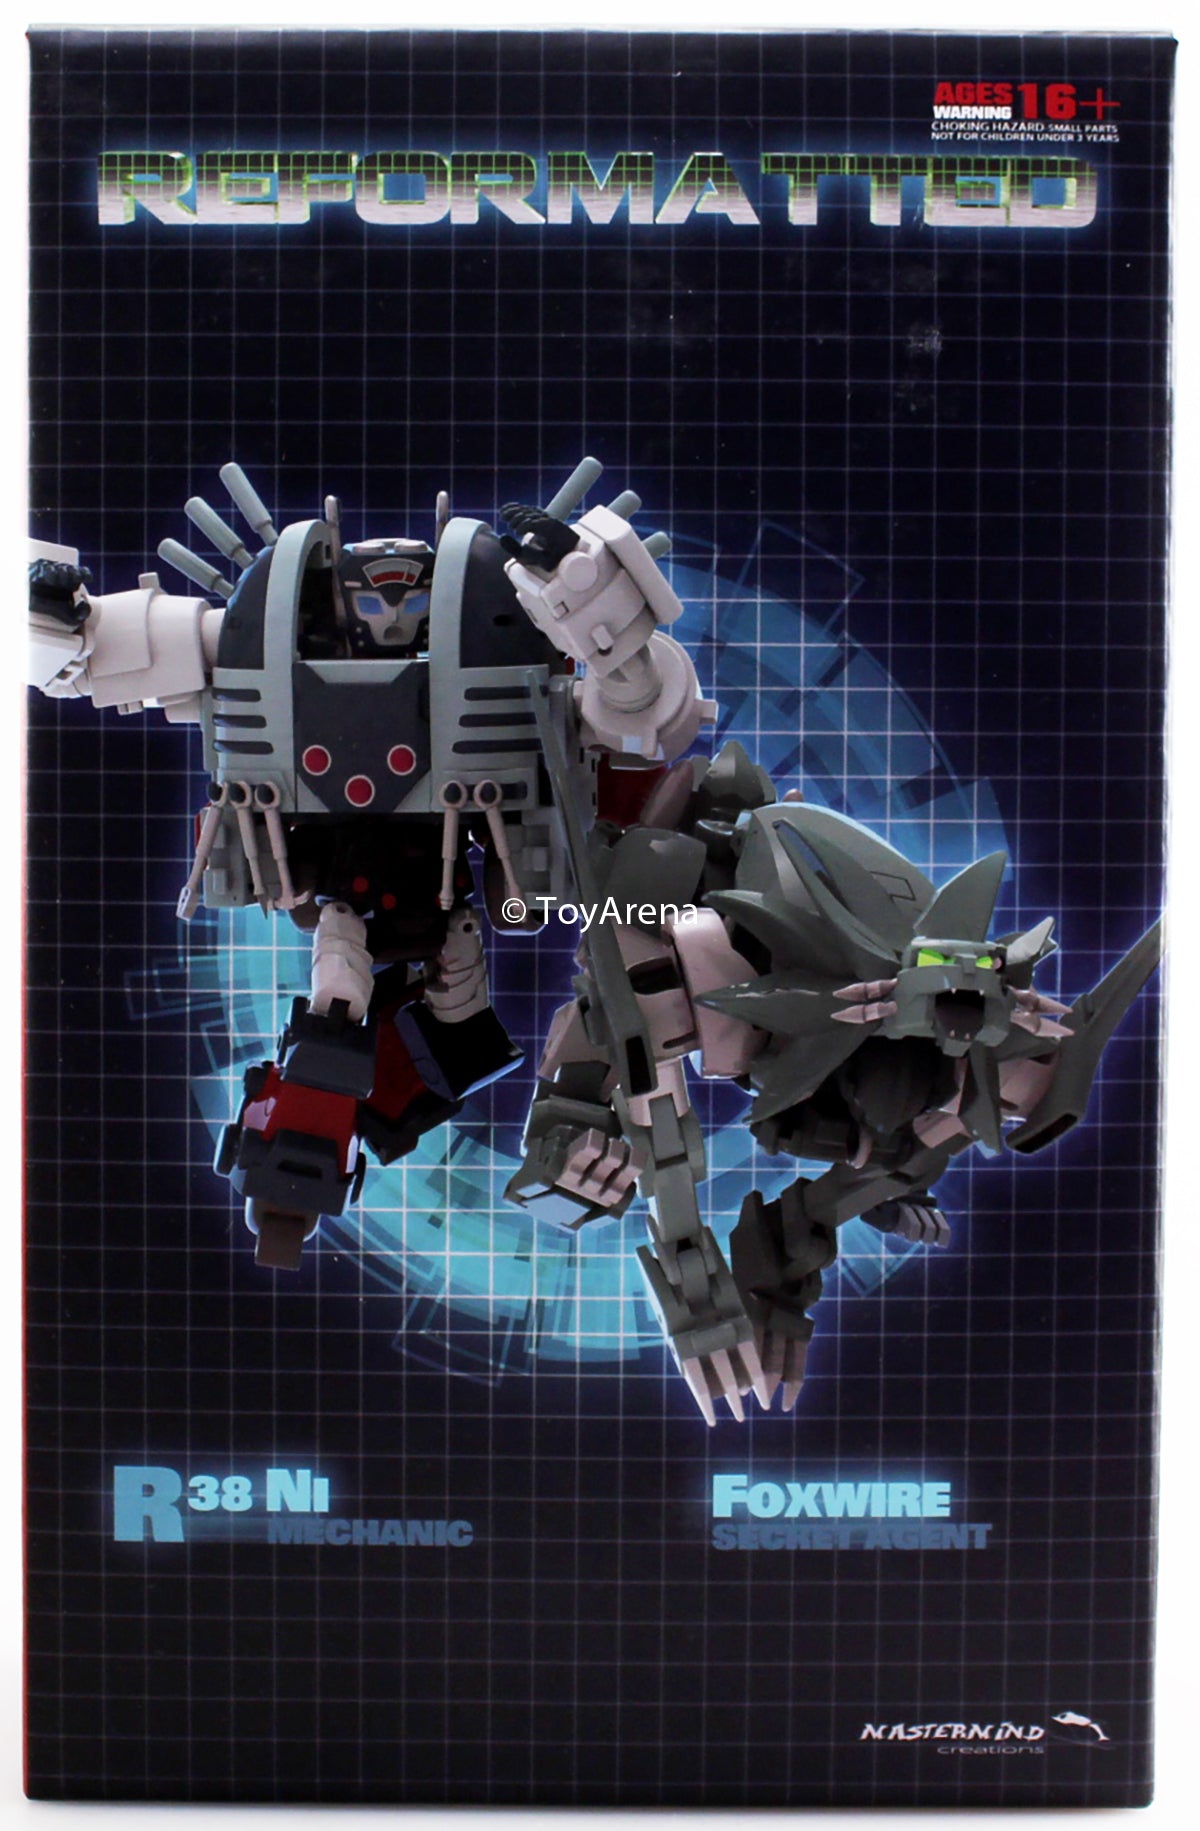 R-38 Reformatted Foxwire and NI MMC Mastermind Creations Action Figure Two Pack